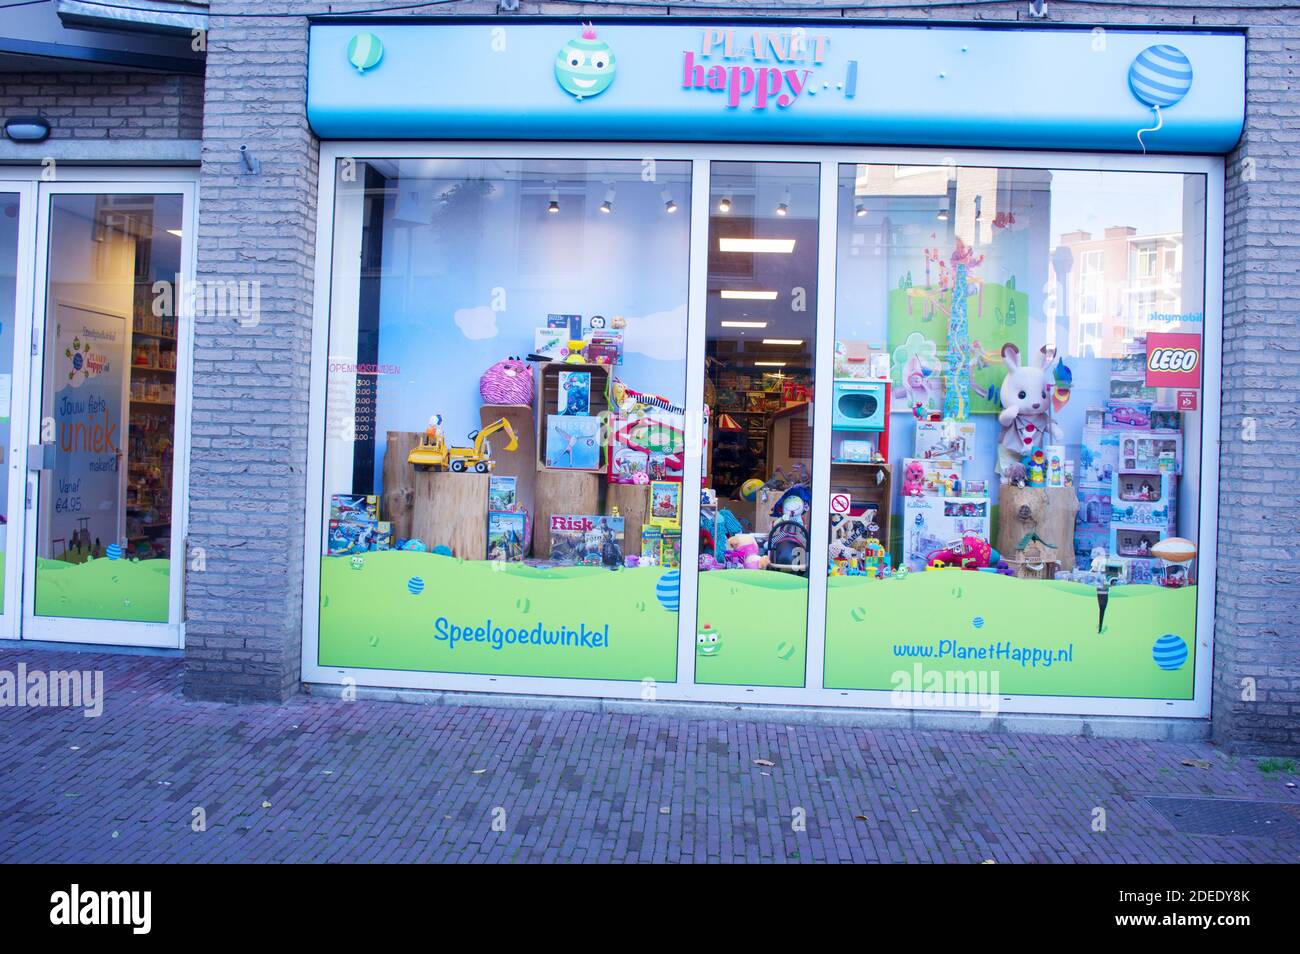 Arnhem, Netherlands - November 23, 2020: of a toy store with toys on display Stock Photo Alamy